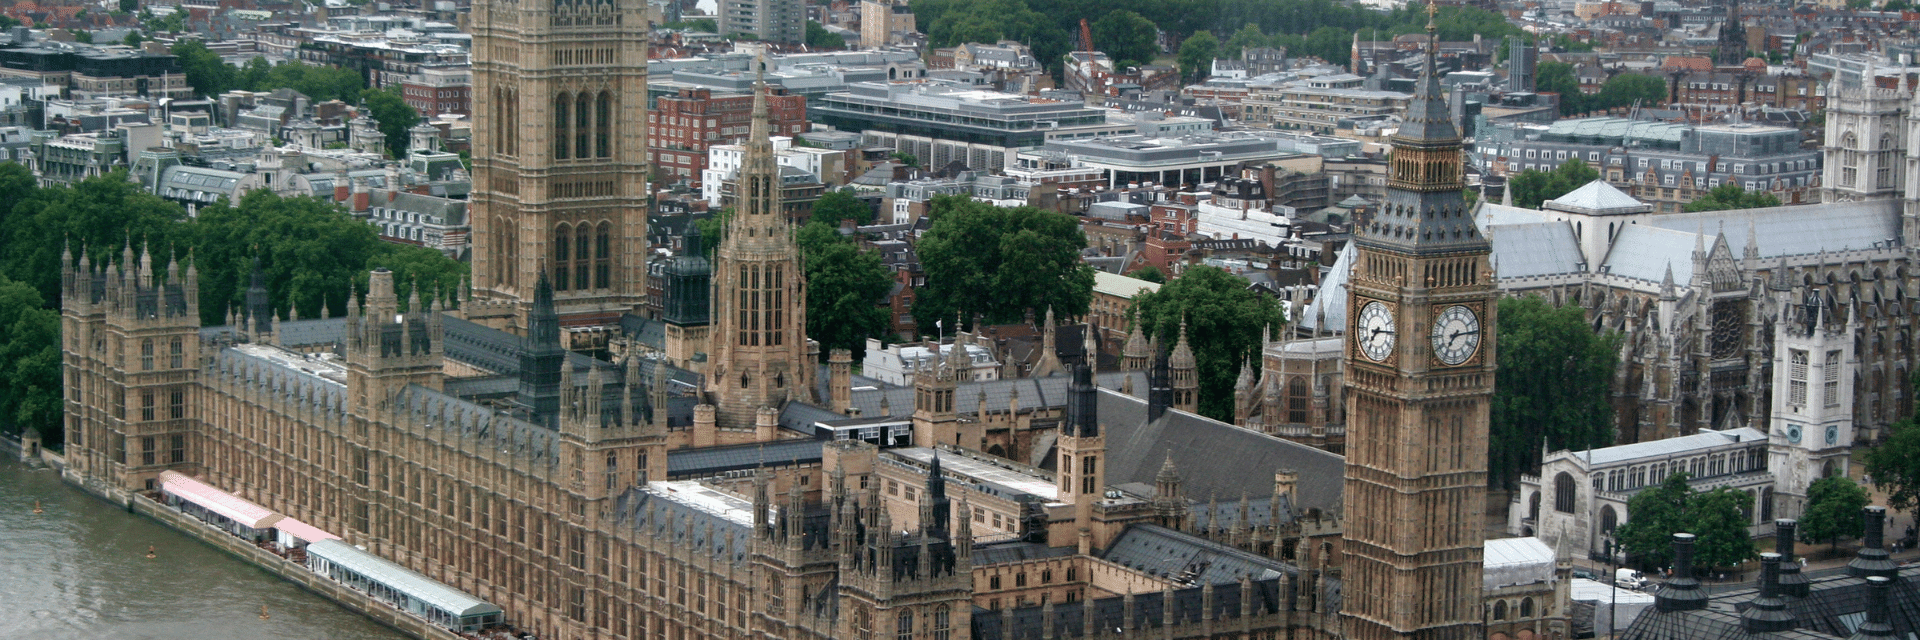 Houses of Parliment